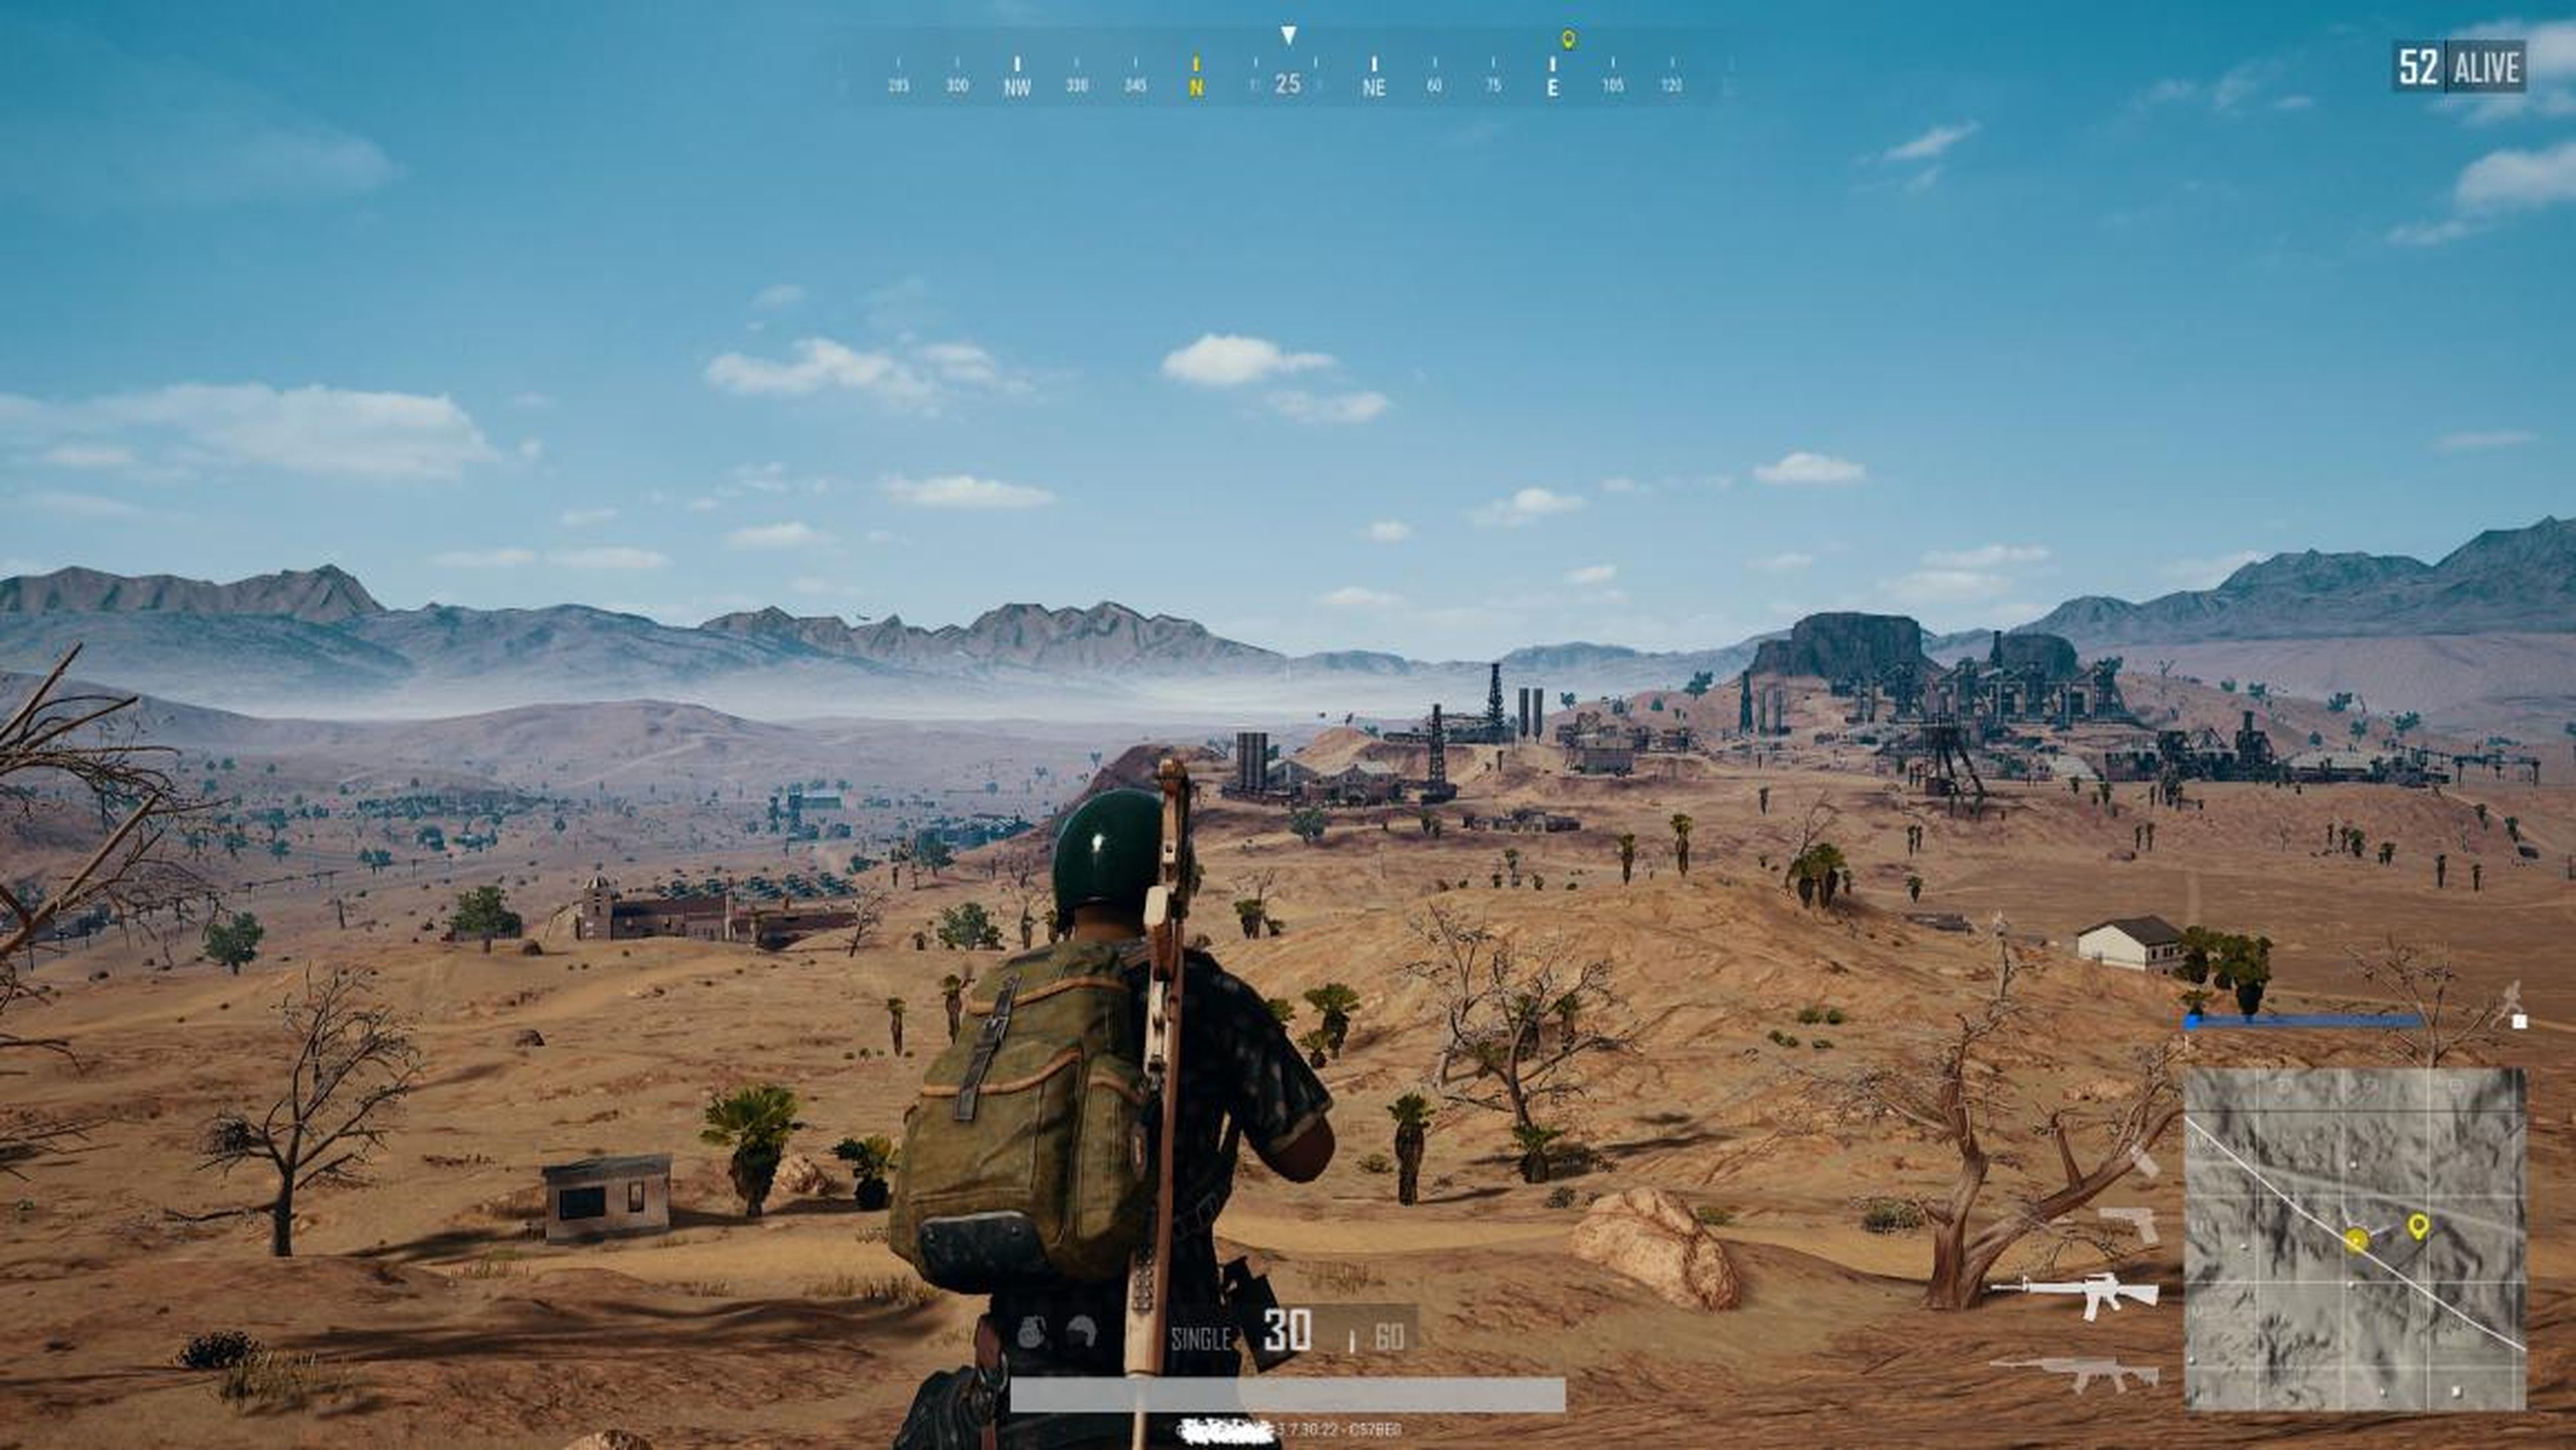 "PlayerUnknown's Battlegrounds Mobile" is the free-to-play smartphone version of the popular battle royale game, and takes ninth place with 1.52 billion hours played.